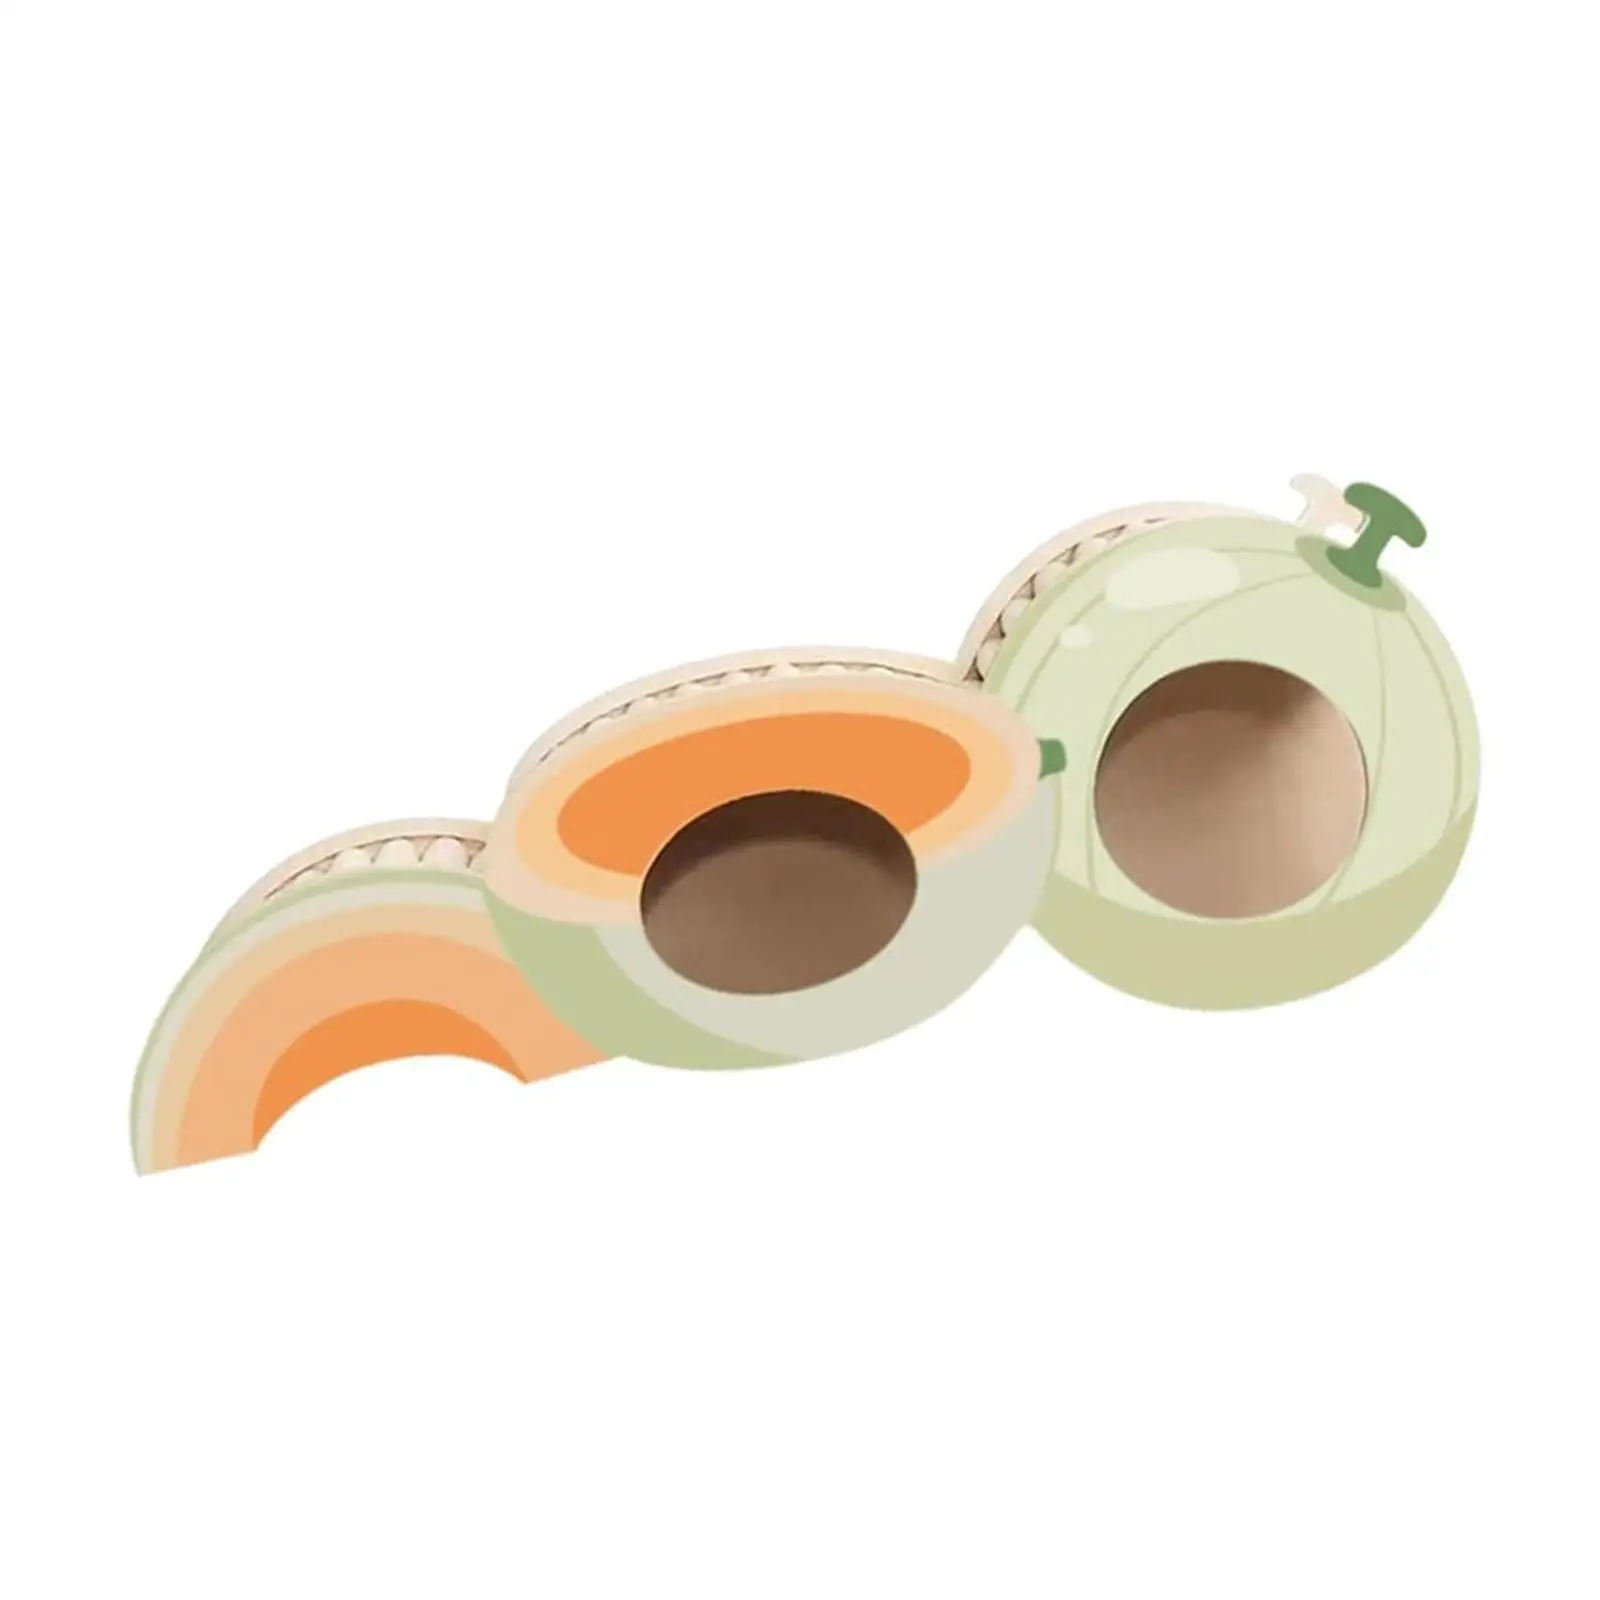 Novelty Hamster Tunnels and Bridge Wooden Pet Hamster Toy Hamster Tunnels with Climbing Ladder for Similar Sized Pets Guinea Pig